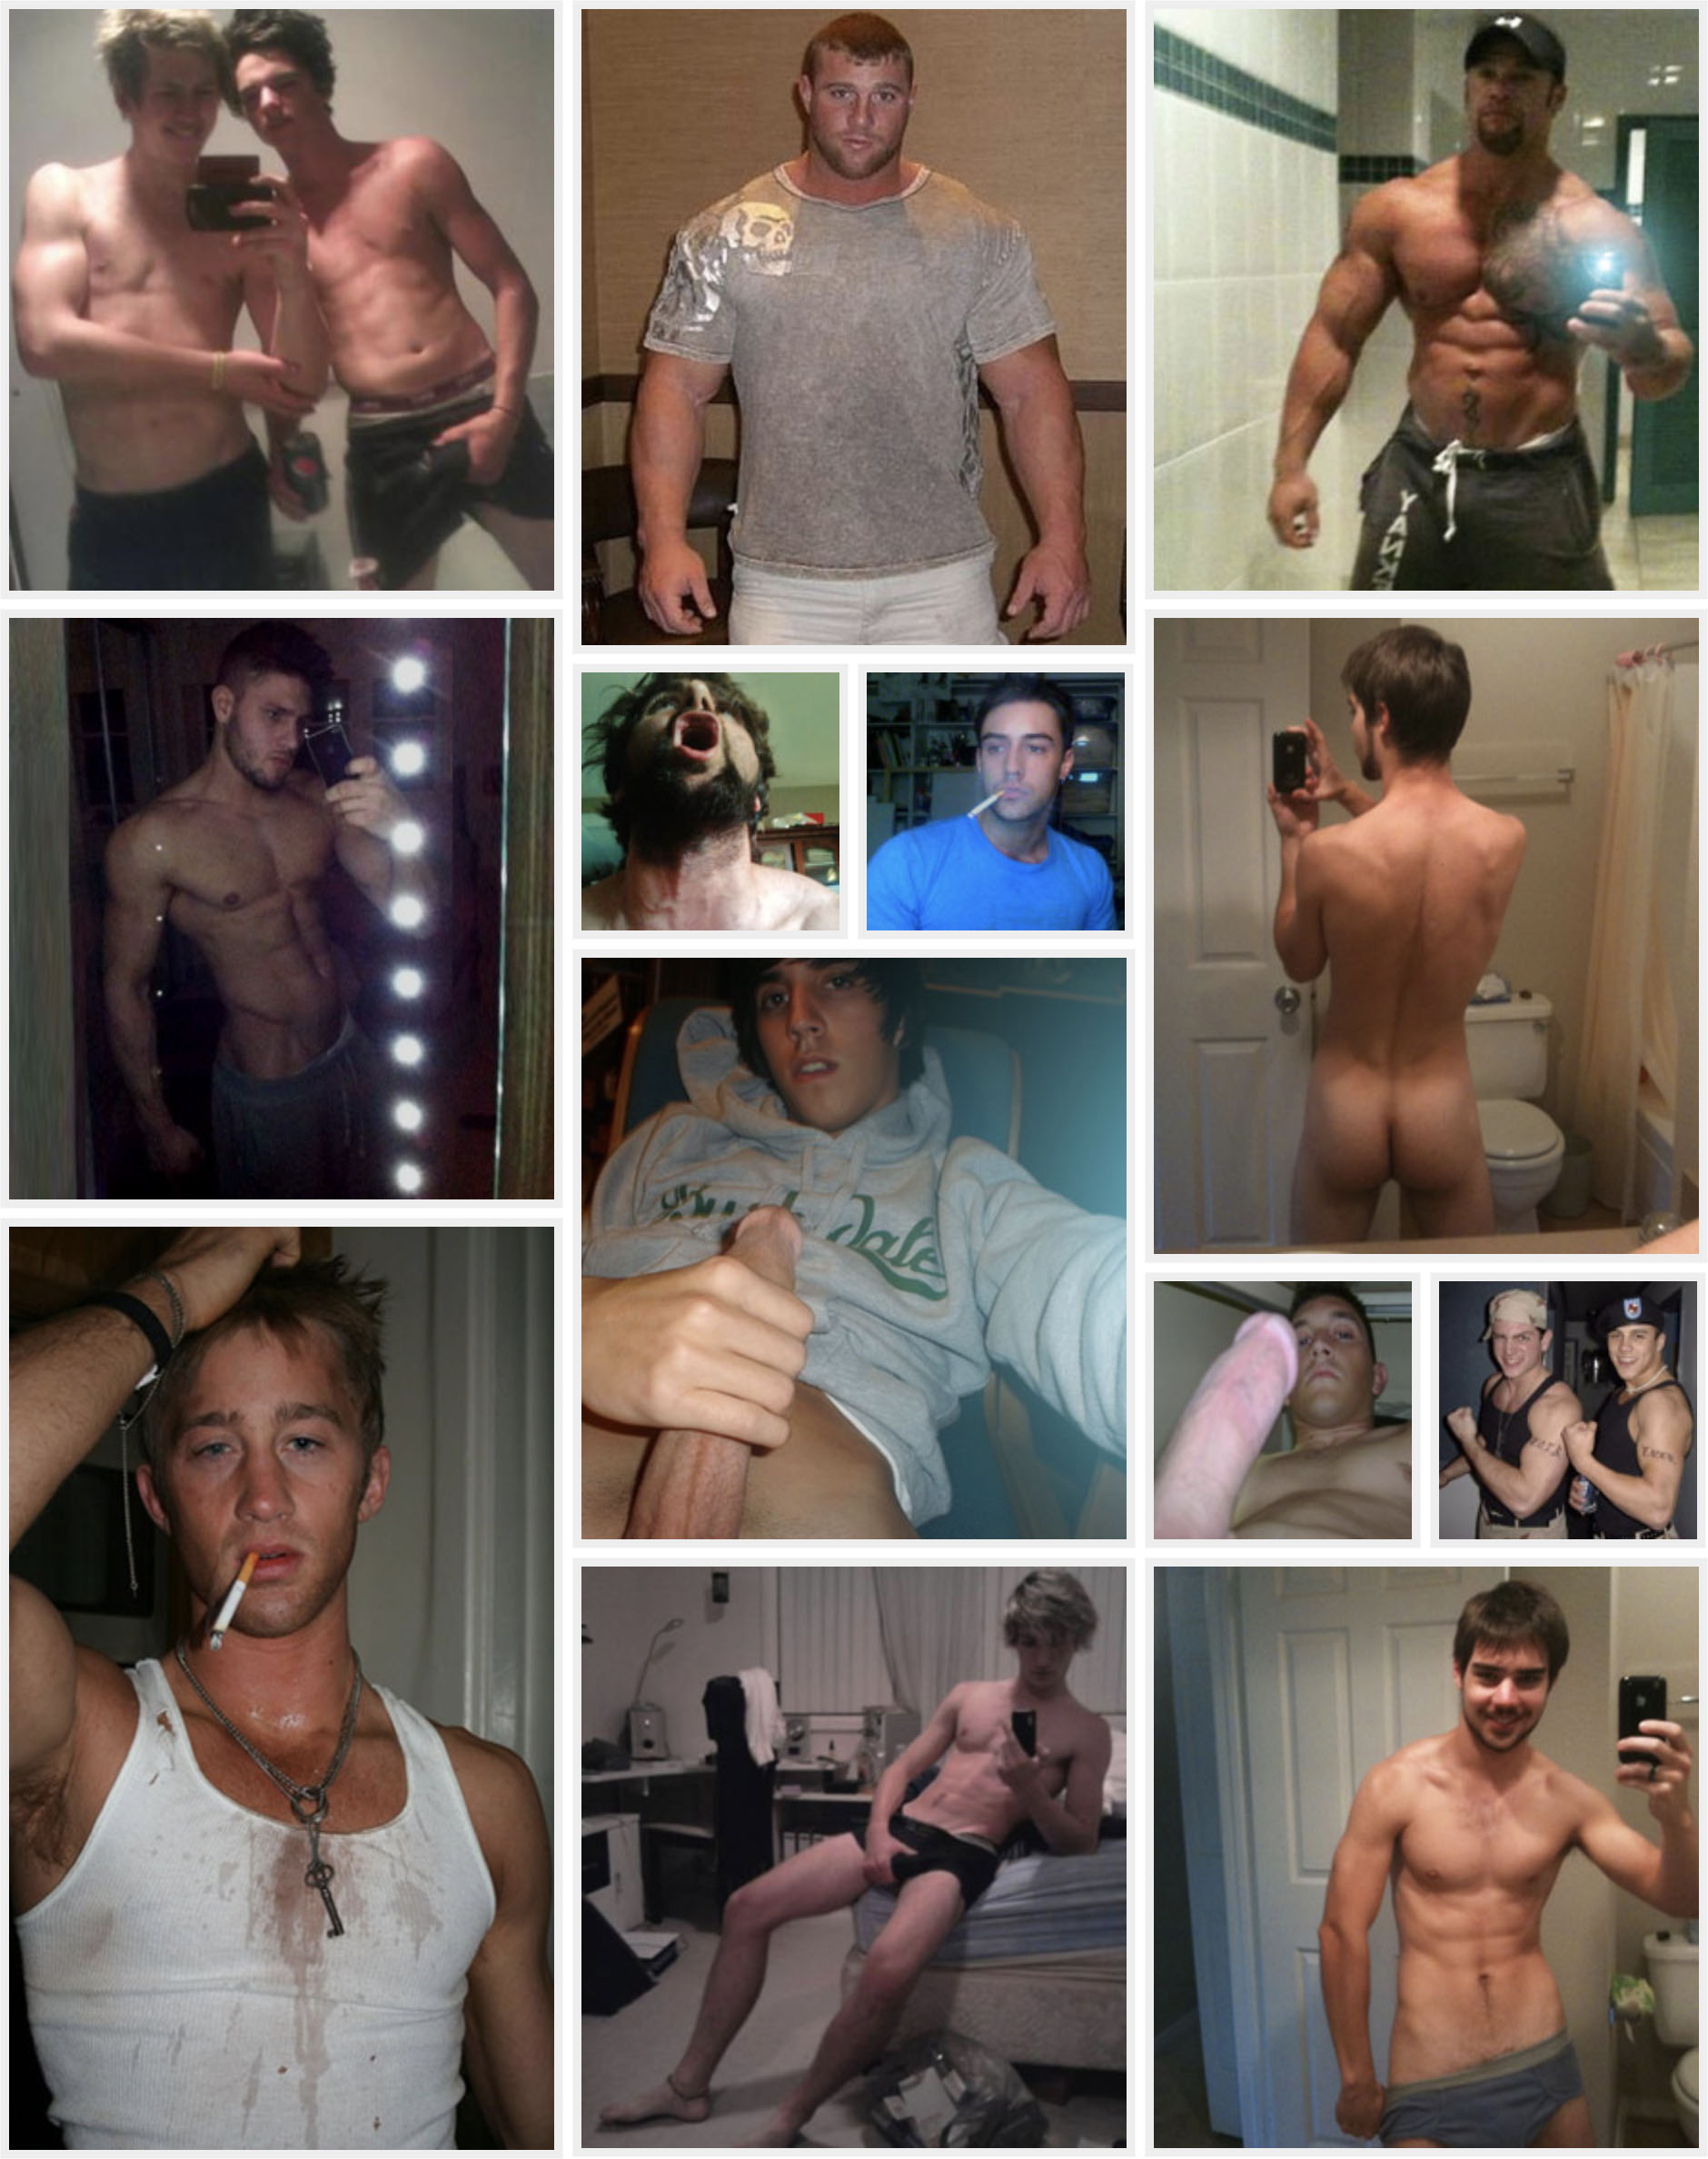 WatchDudes the ORIGINAL Straight Men Site Featuring The Hottest Naked Dudes Posing Naked Boys Flirting with Gays! WatchDudes.com